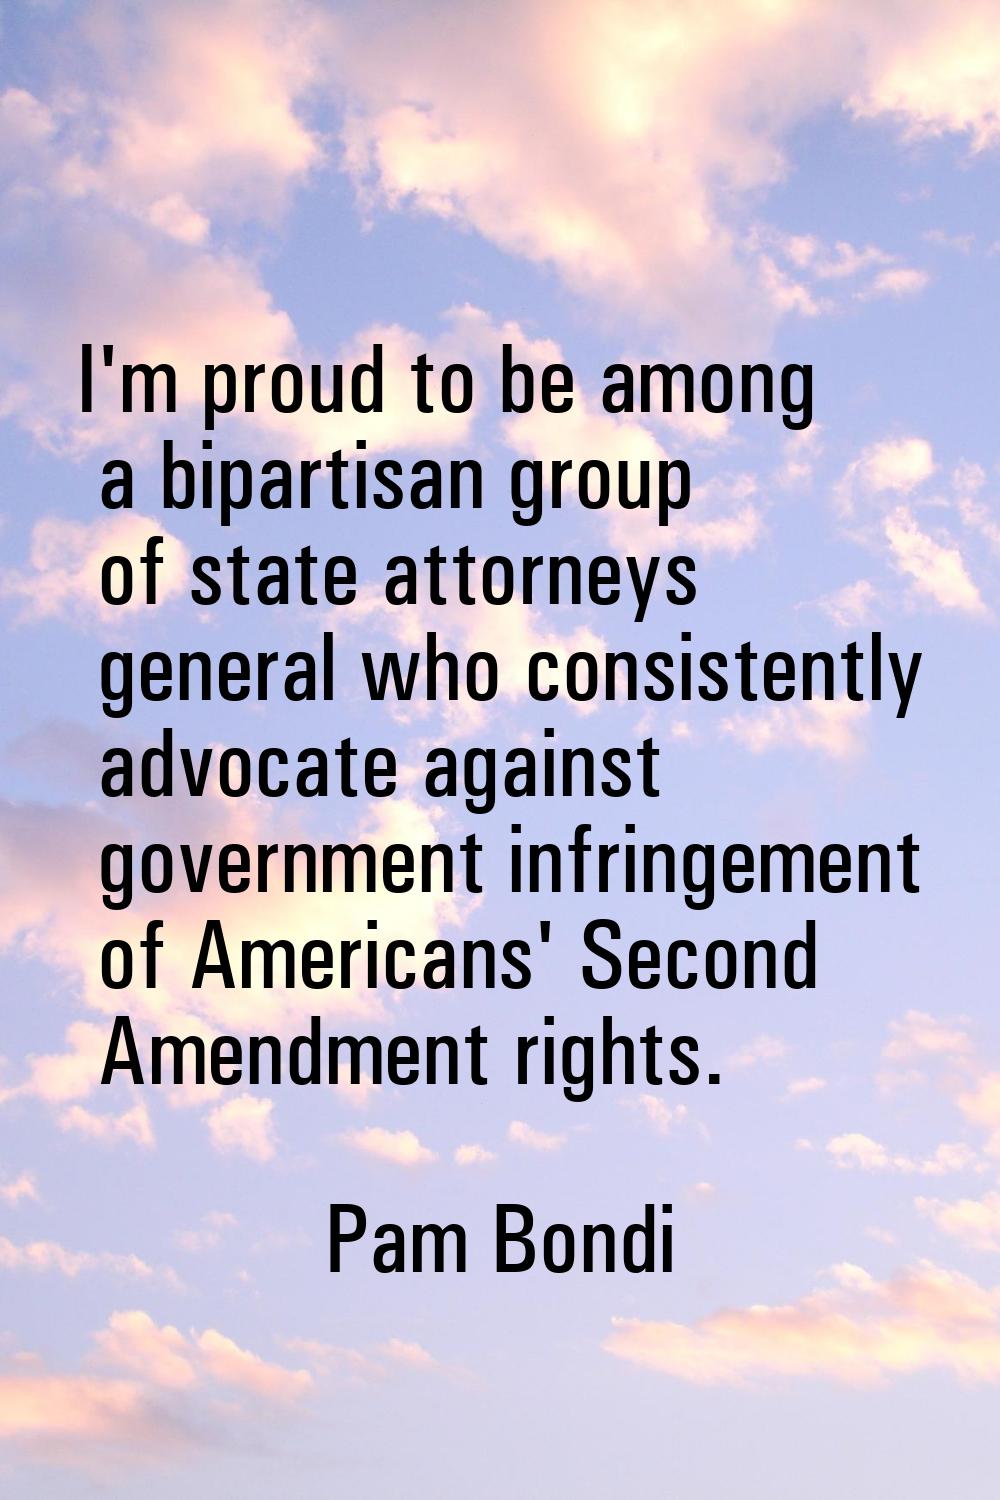 I'm proud to be among a bipartisan group of state attorneys general who consistently advocate again